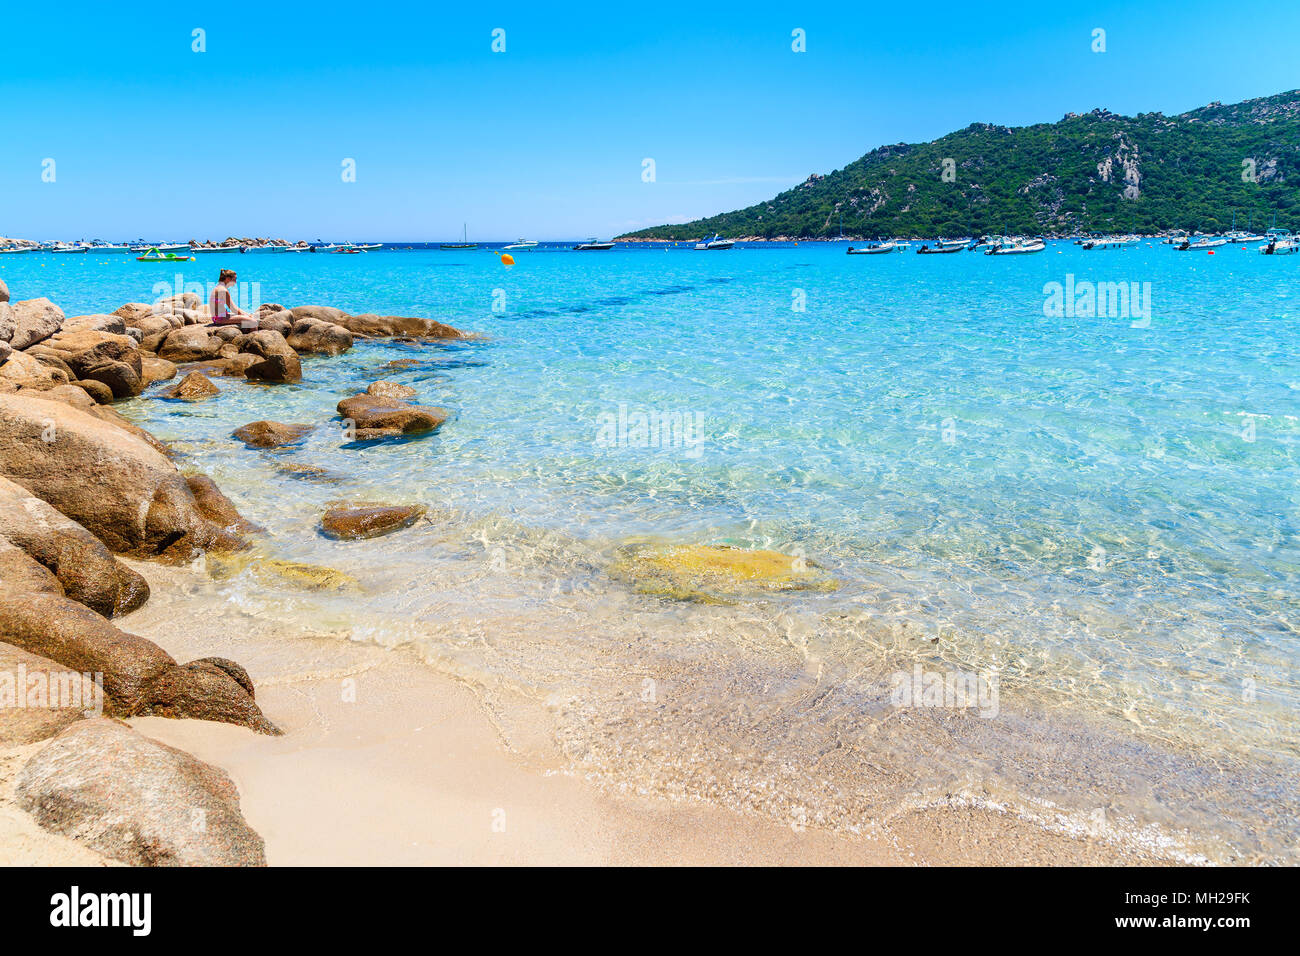 SANTA GIULIA BEACH, CORSICA ISLAND - JUN 22, 2015: Young woman sitting on rocks on beautiful beach with crystal clear water. This French island is pop Stock Photo